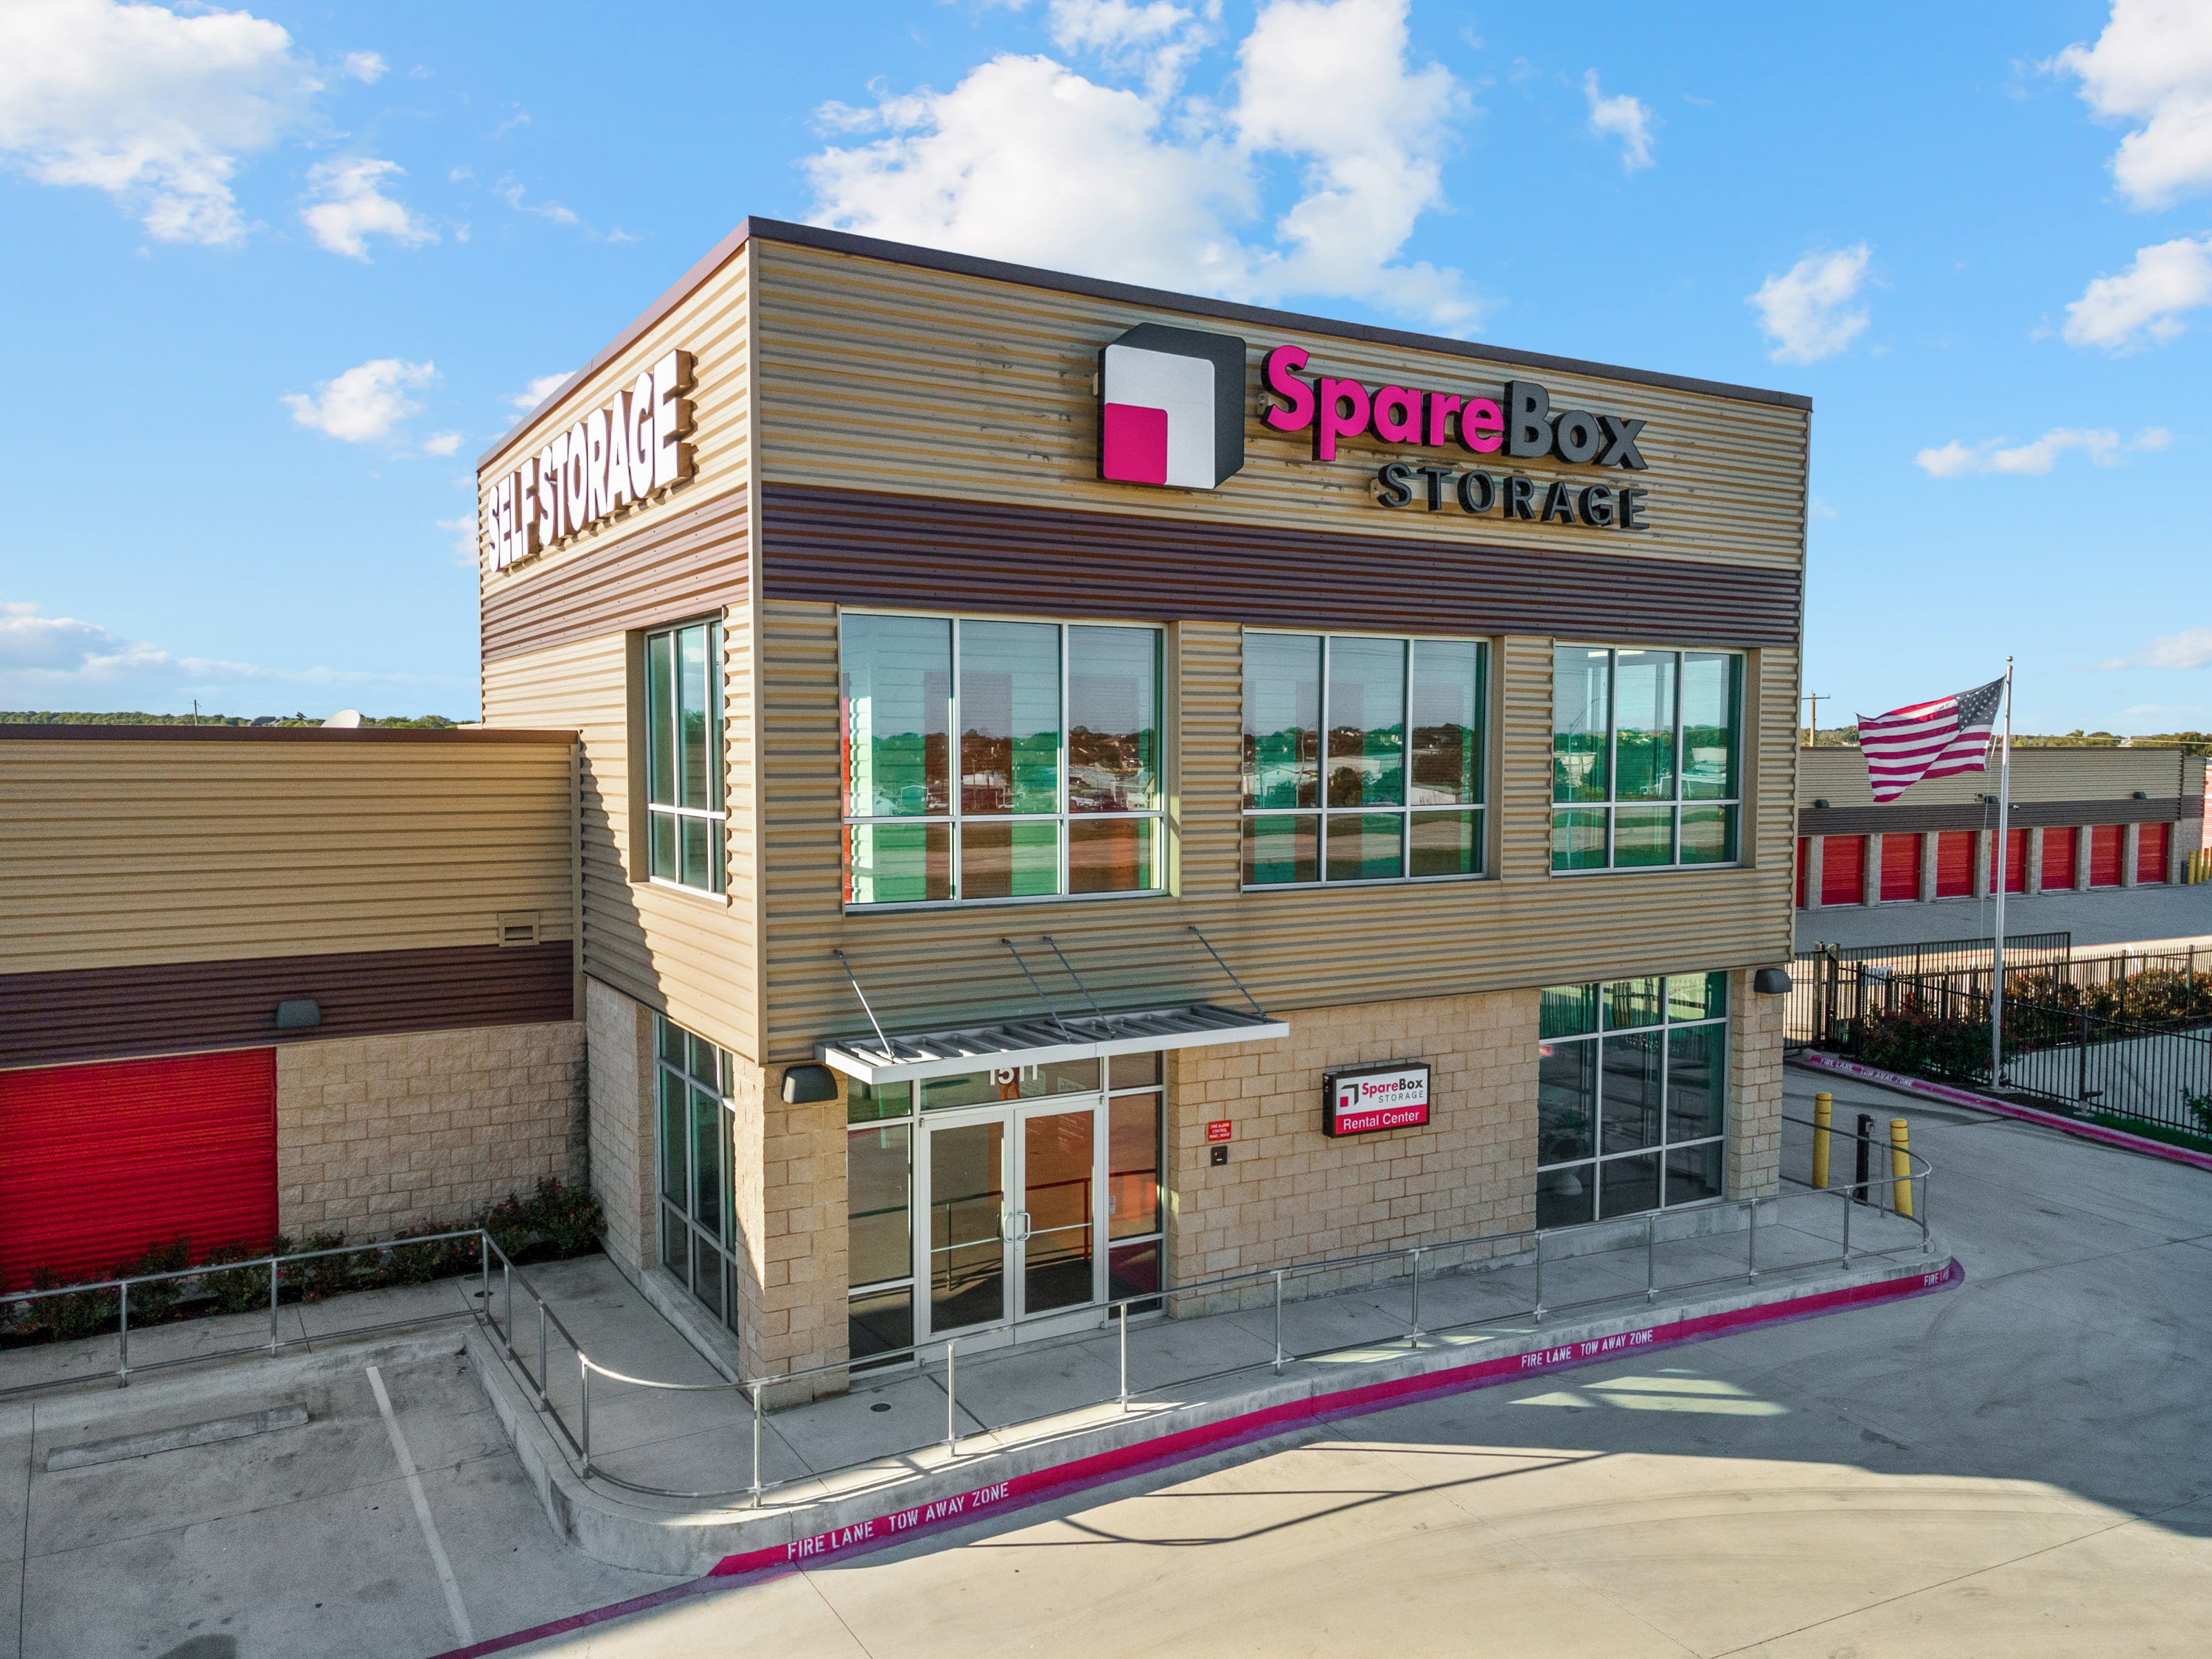 Meet all of your self storage needs in Pflugerville, TX at our Panther Loop location | SpareBox Storage